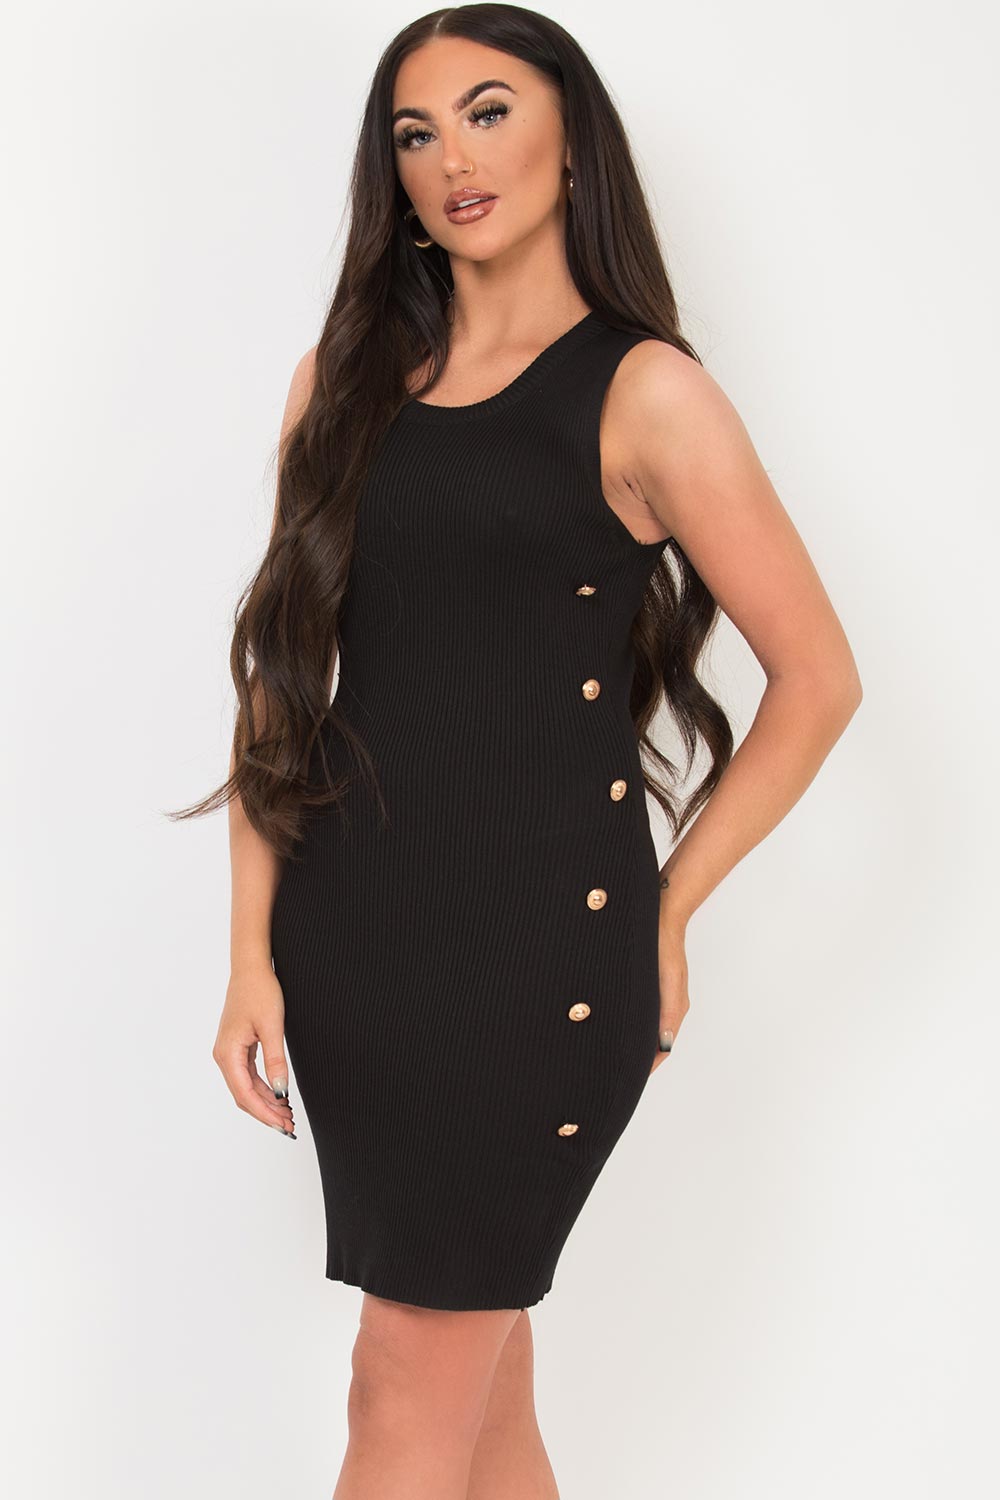 black ribbed bodycon party dress with gold buttons